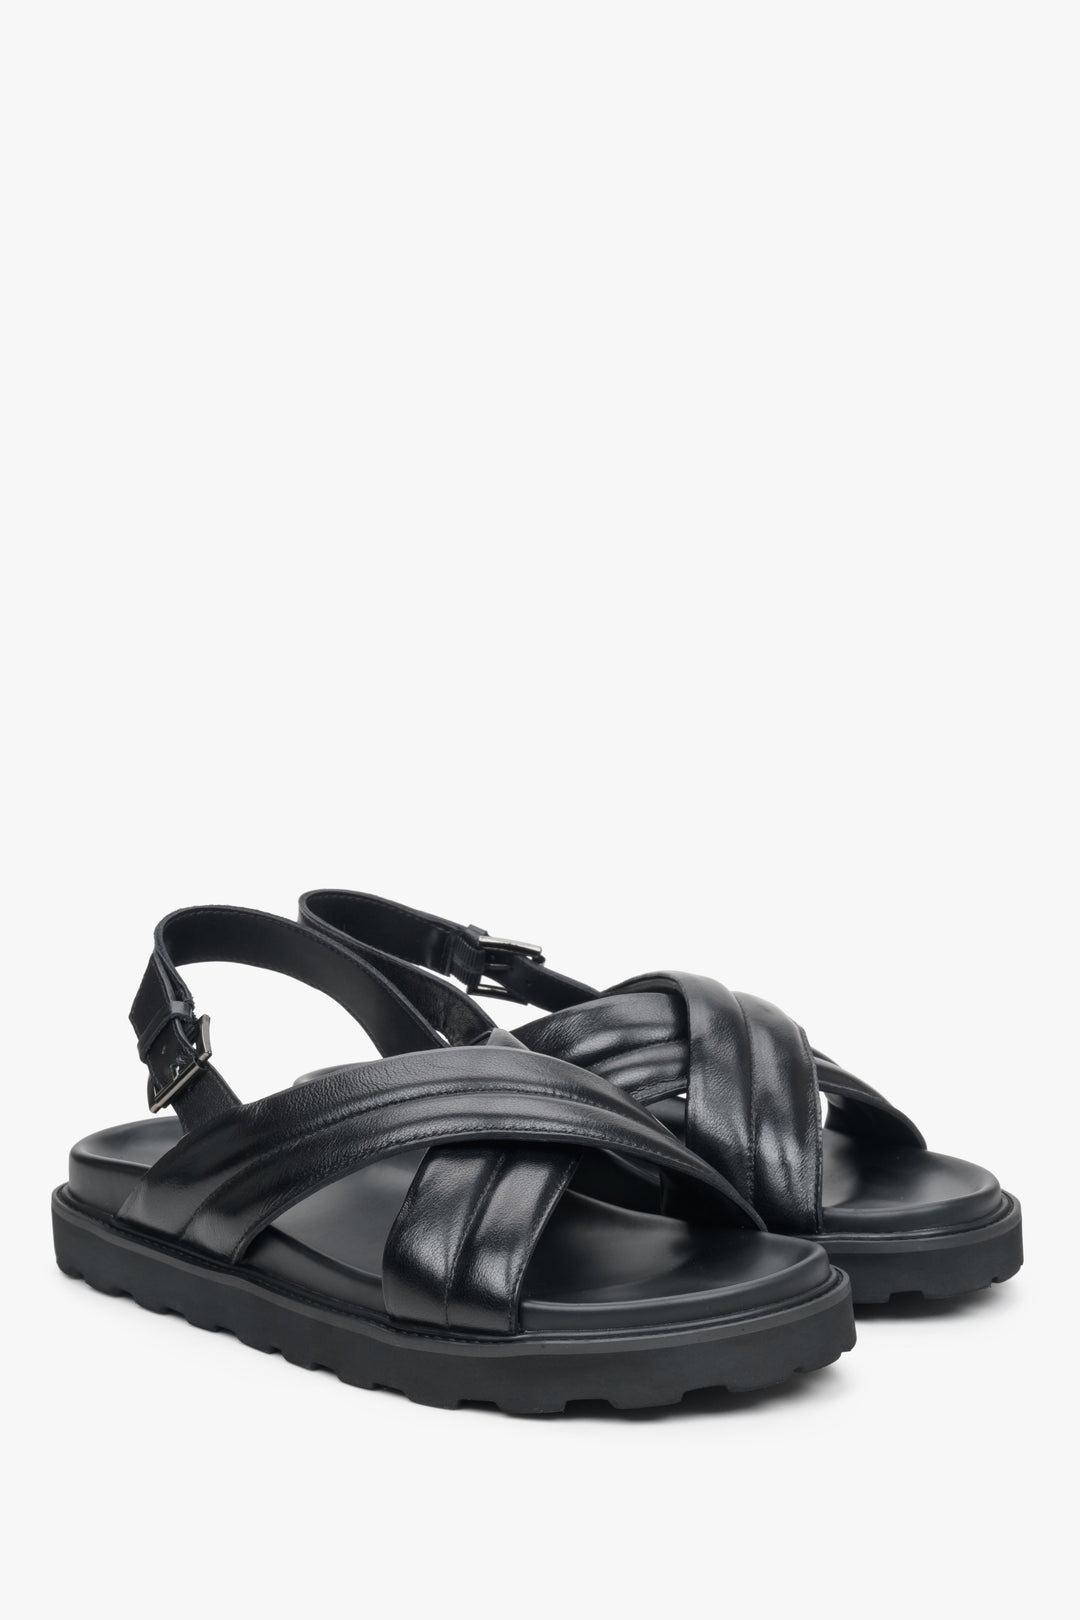 Estro men's sandals in black, made of genuine and synthetic leather, with a soft sole.